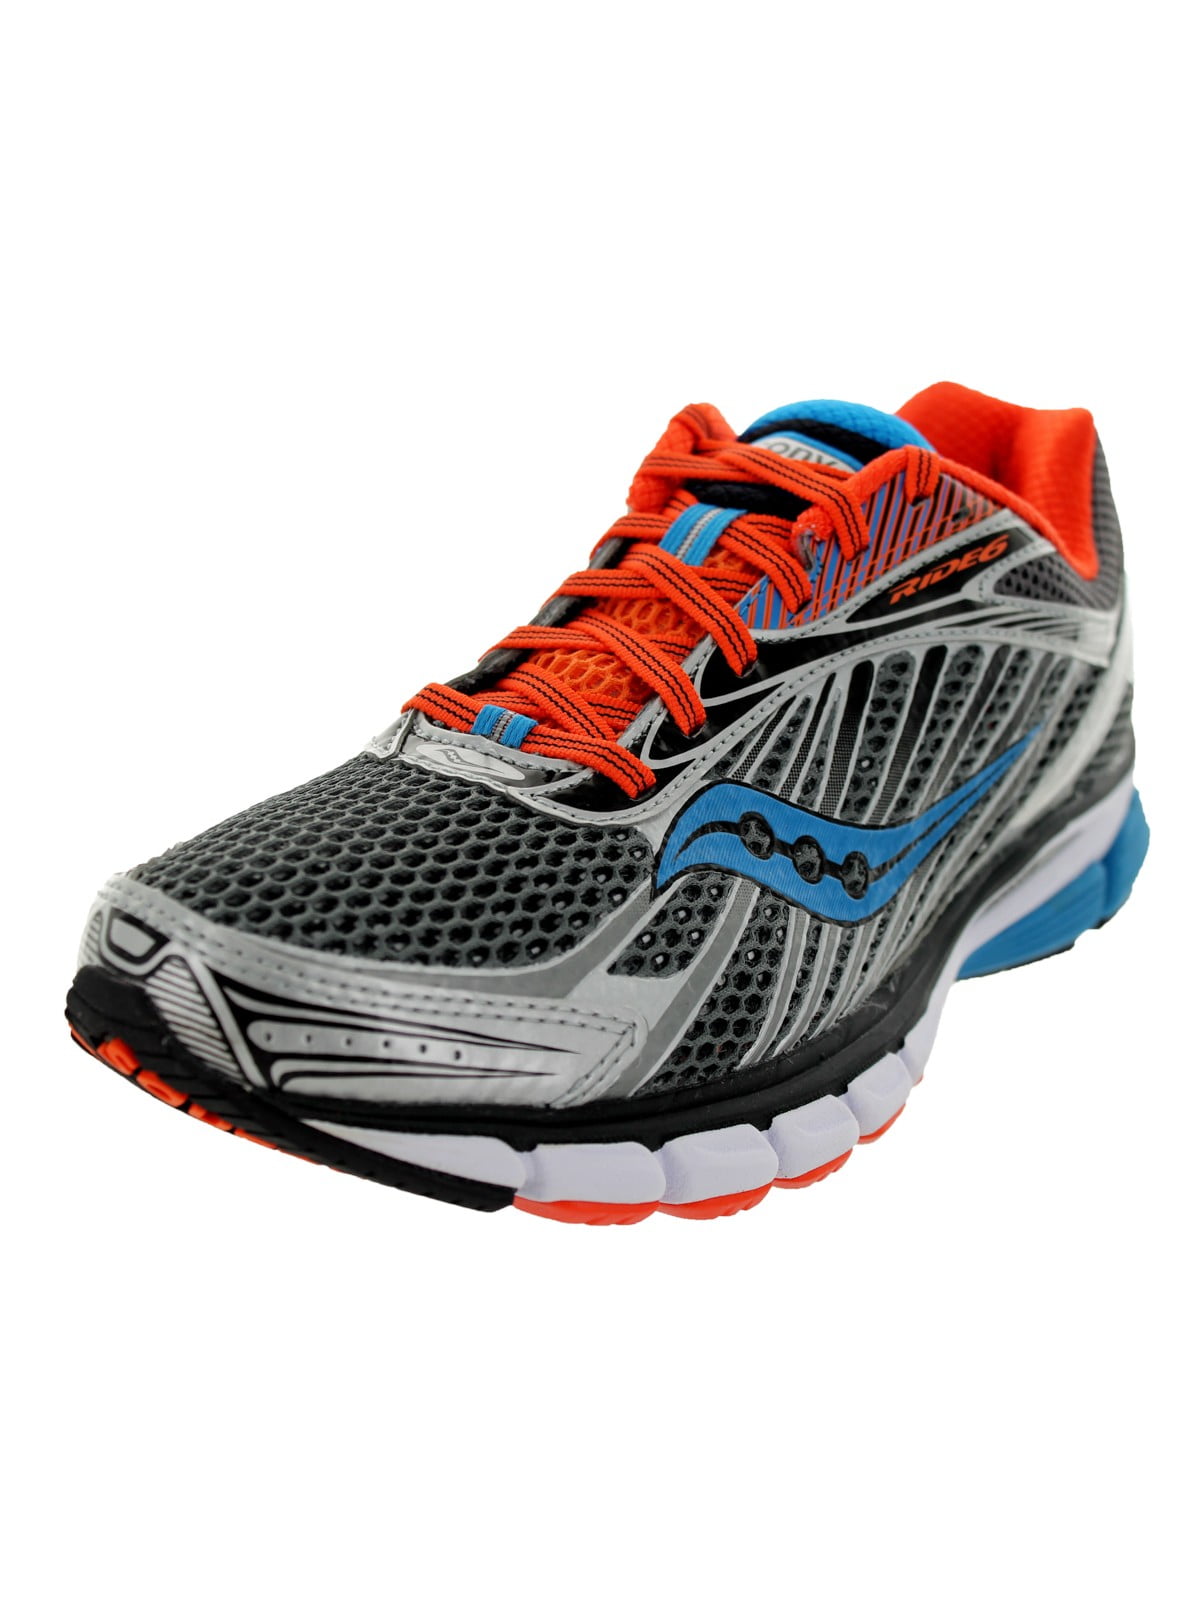 saucony powergrid ride 6 running shoes mens